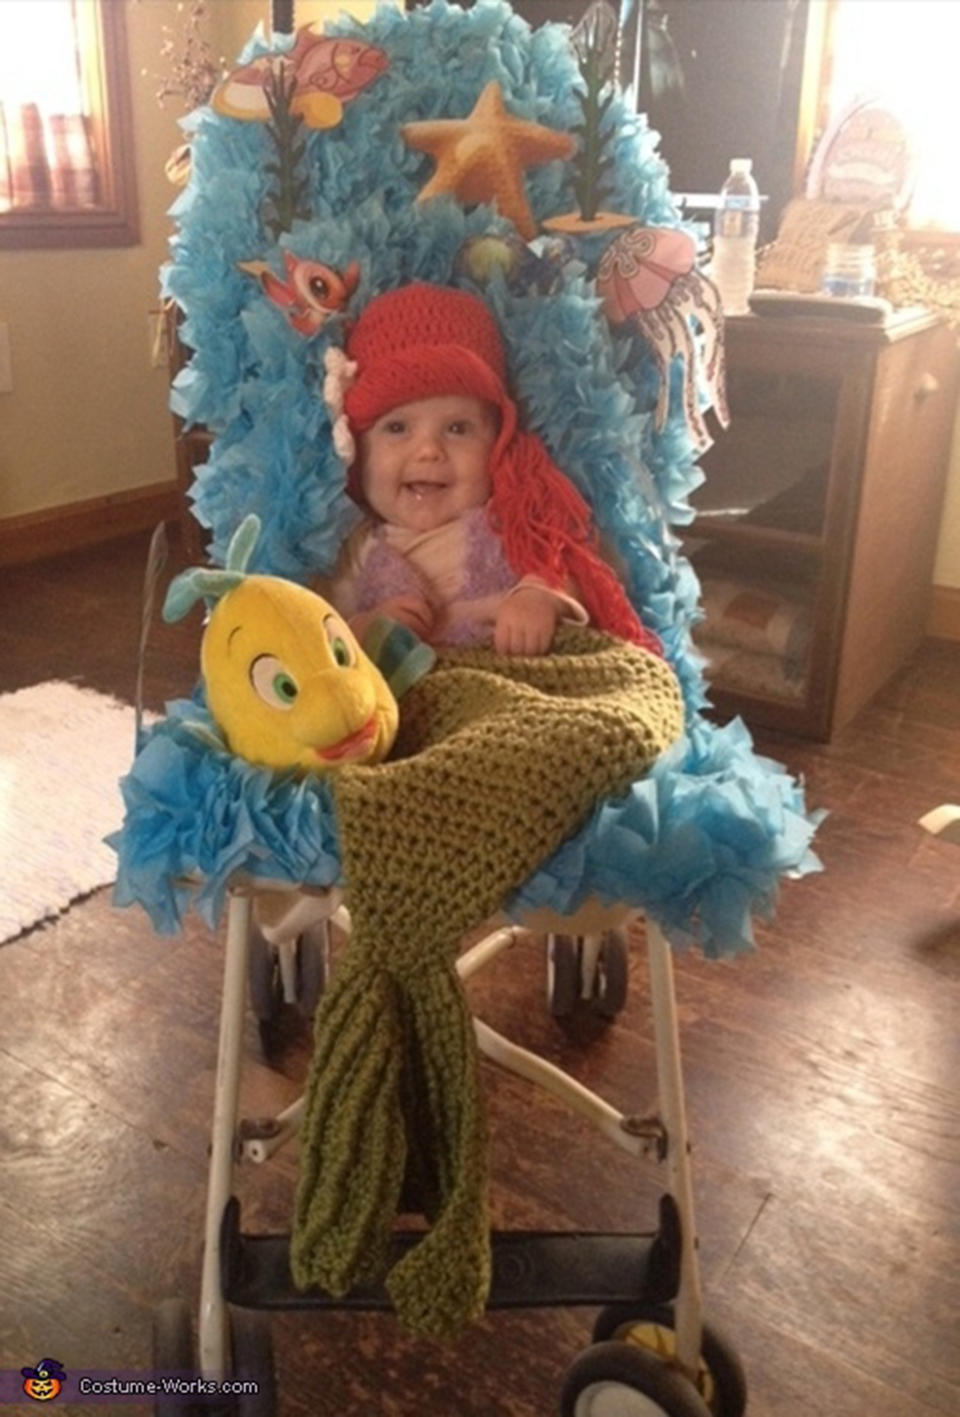 <a href="http://www.costume-works.com/costumes_for_babies/little_mermaid3.html" target="_blank">via Costume Works </a>